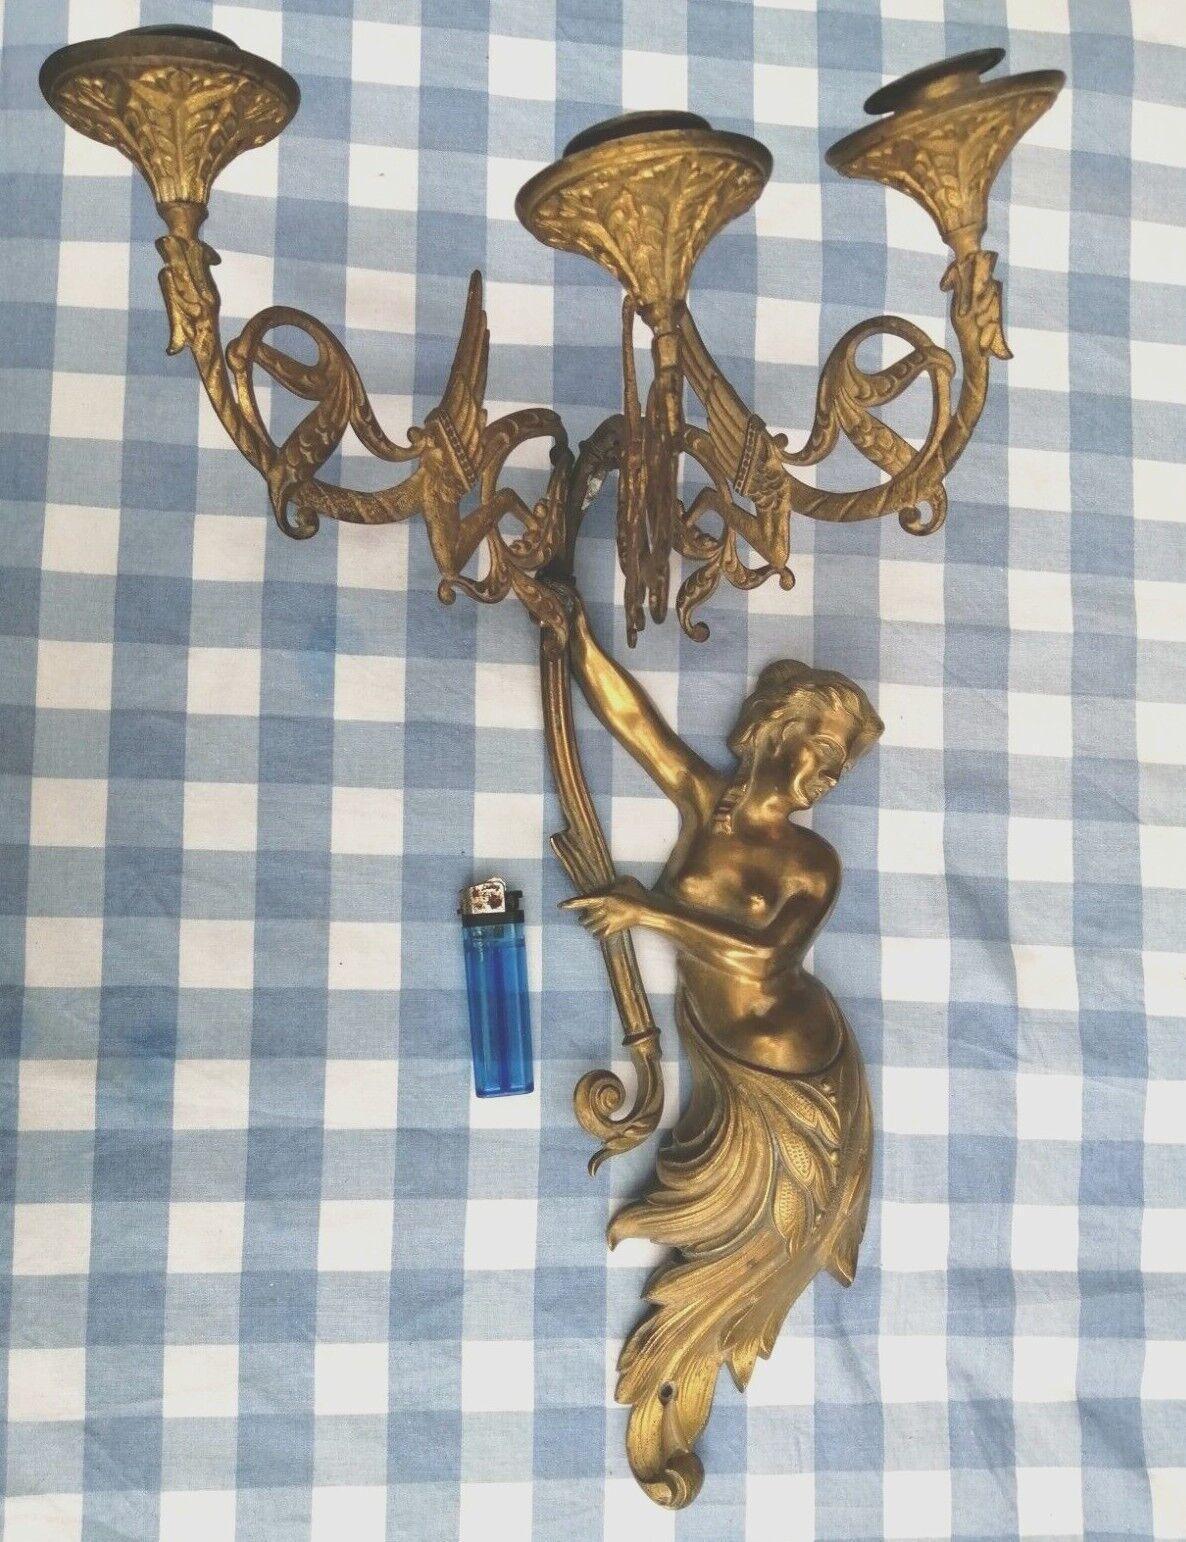 1920's French Art Deco 3 Light Bronze Mermais with Sea Serpents Wall Sconce. Original unelectrified state. Large piece with 3 candle holders.